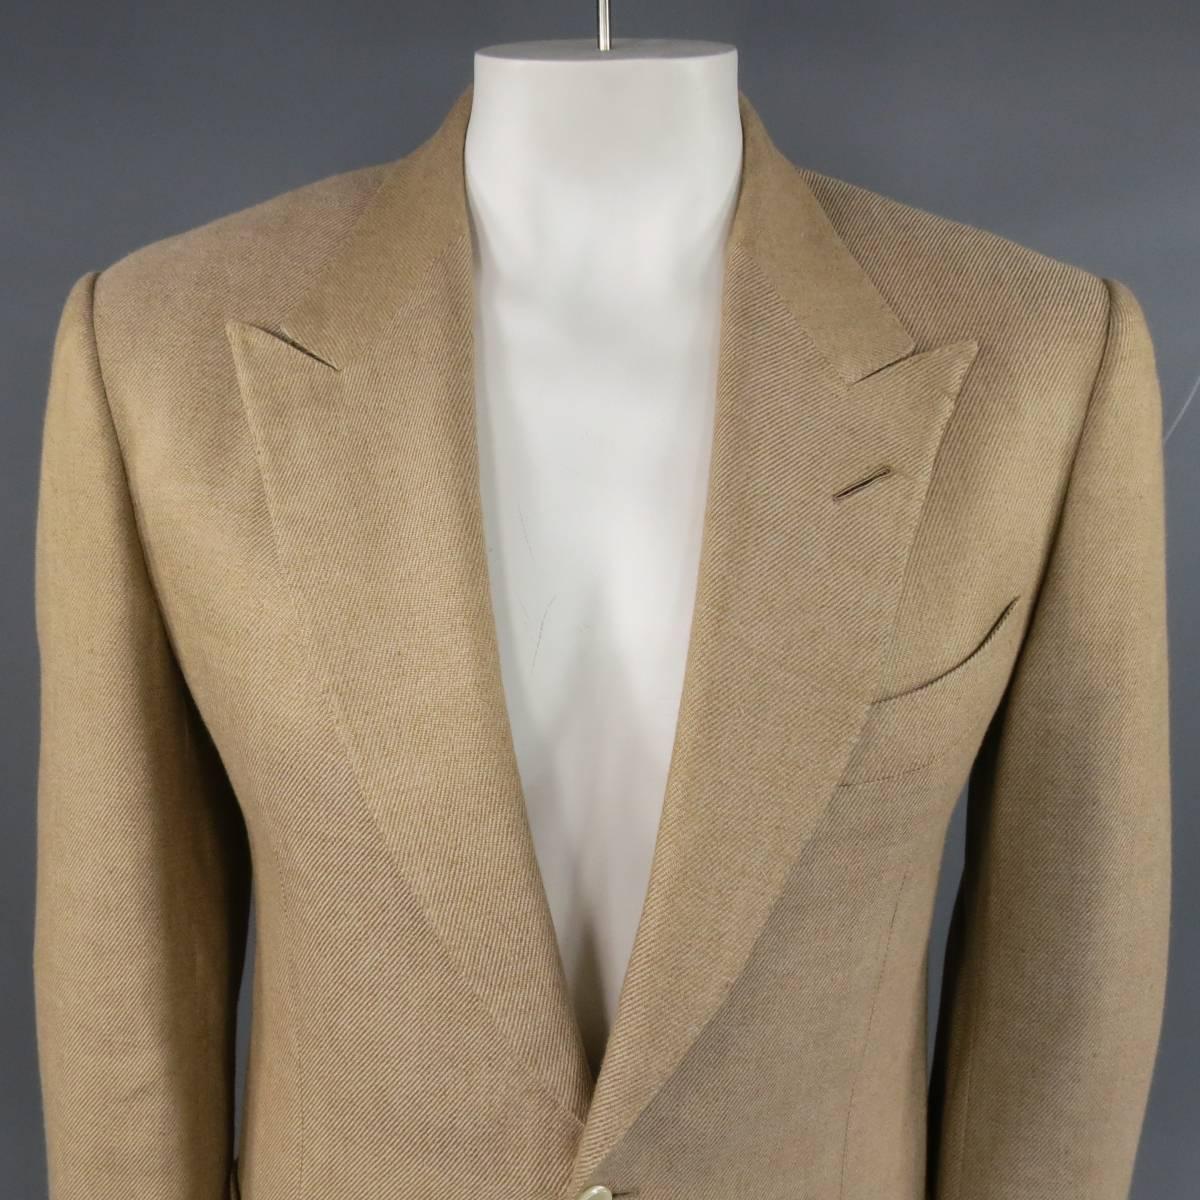 Men's TOM FORD Sport Coat consists of linen/silk material in a khaki color tone. Designed in a 2-button front, peak-lapel collar, top pocket square and bottom patch pockets. Detailed with 5-button cuffs, double back vent, woven pattern and